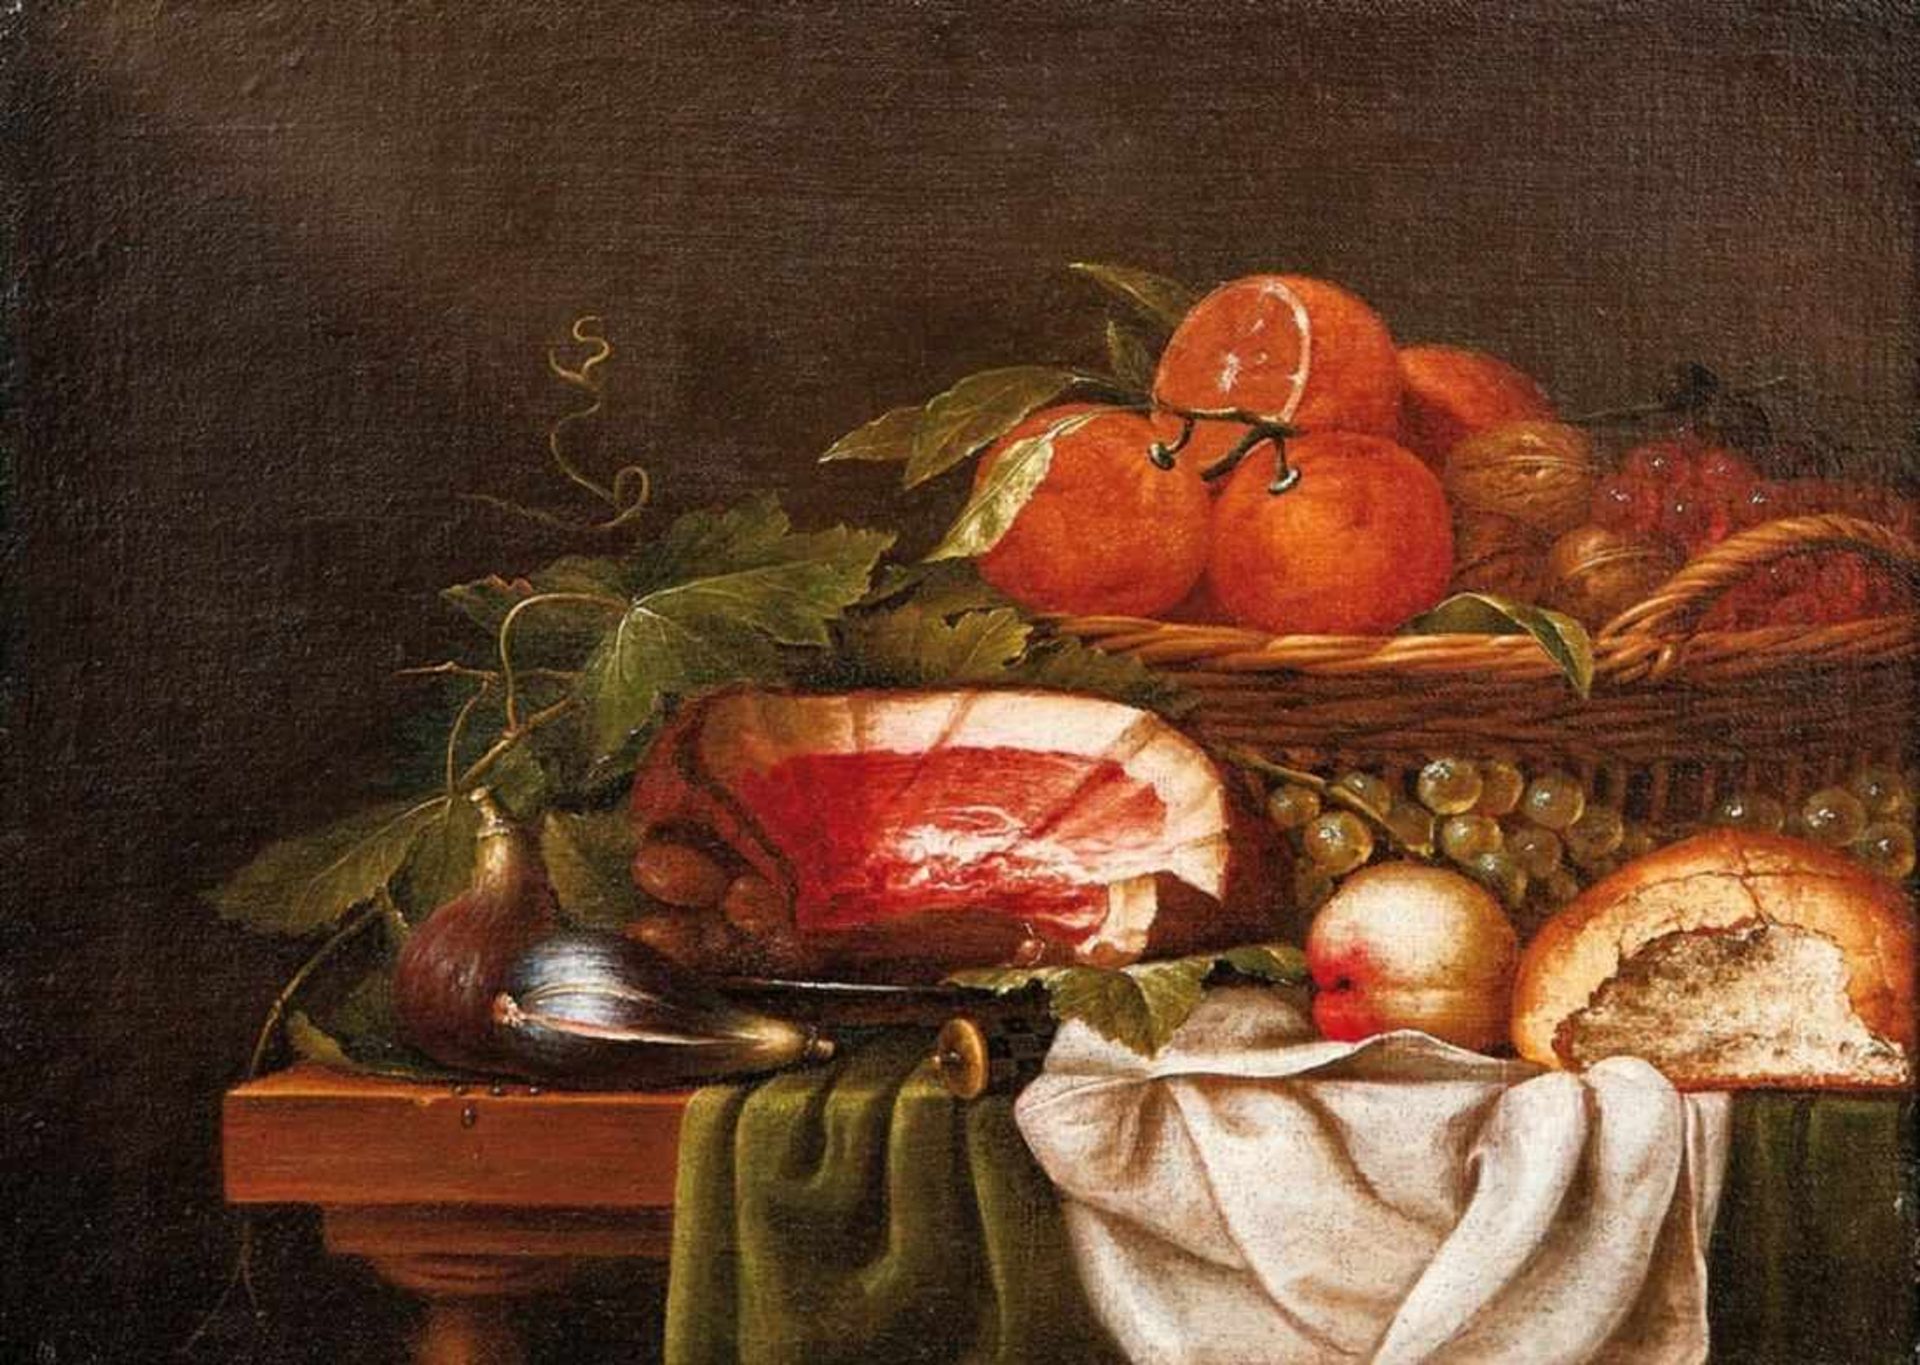 Still life with ham, bread and fruitFlemish master of the 17th centuryOil/Canvas. 41 x 55.5 cm.Old